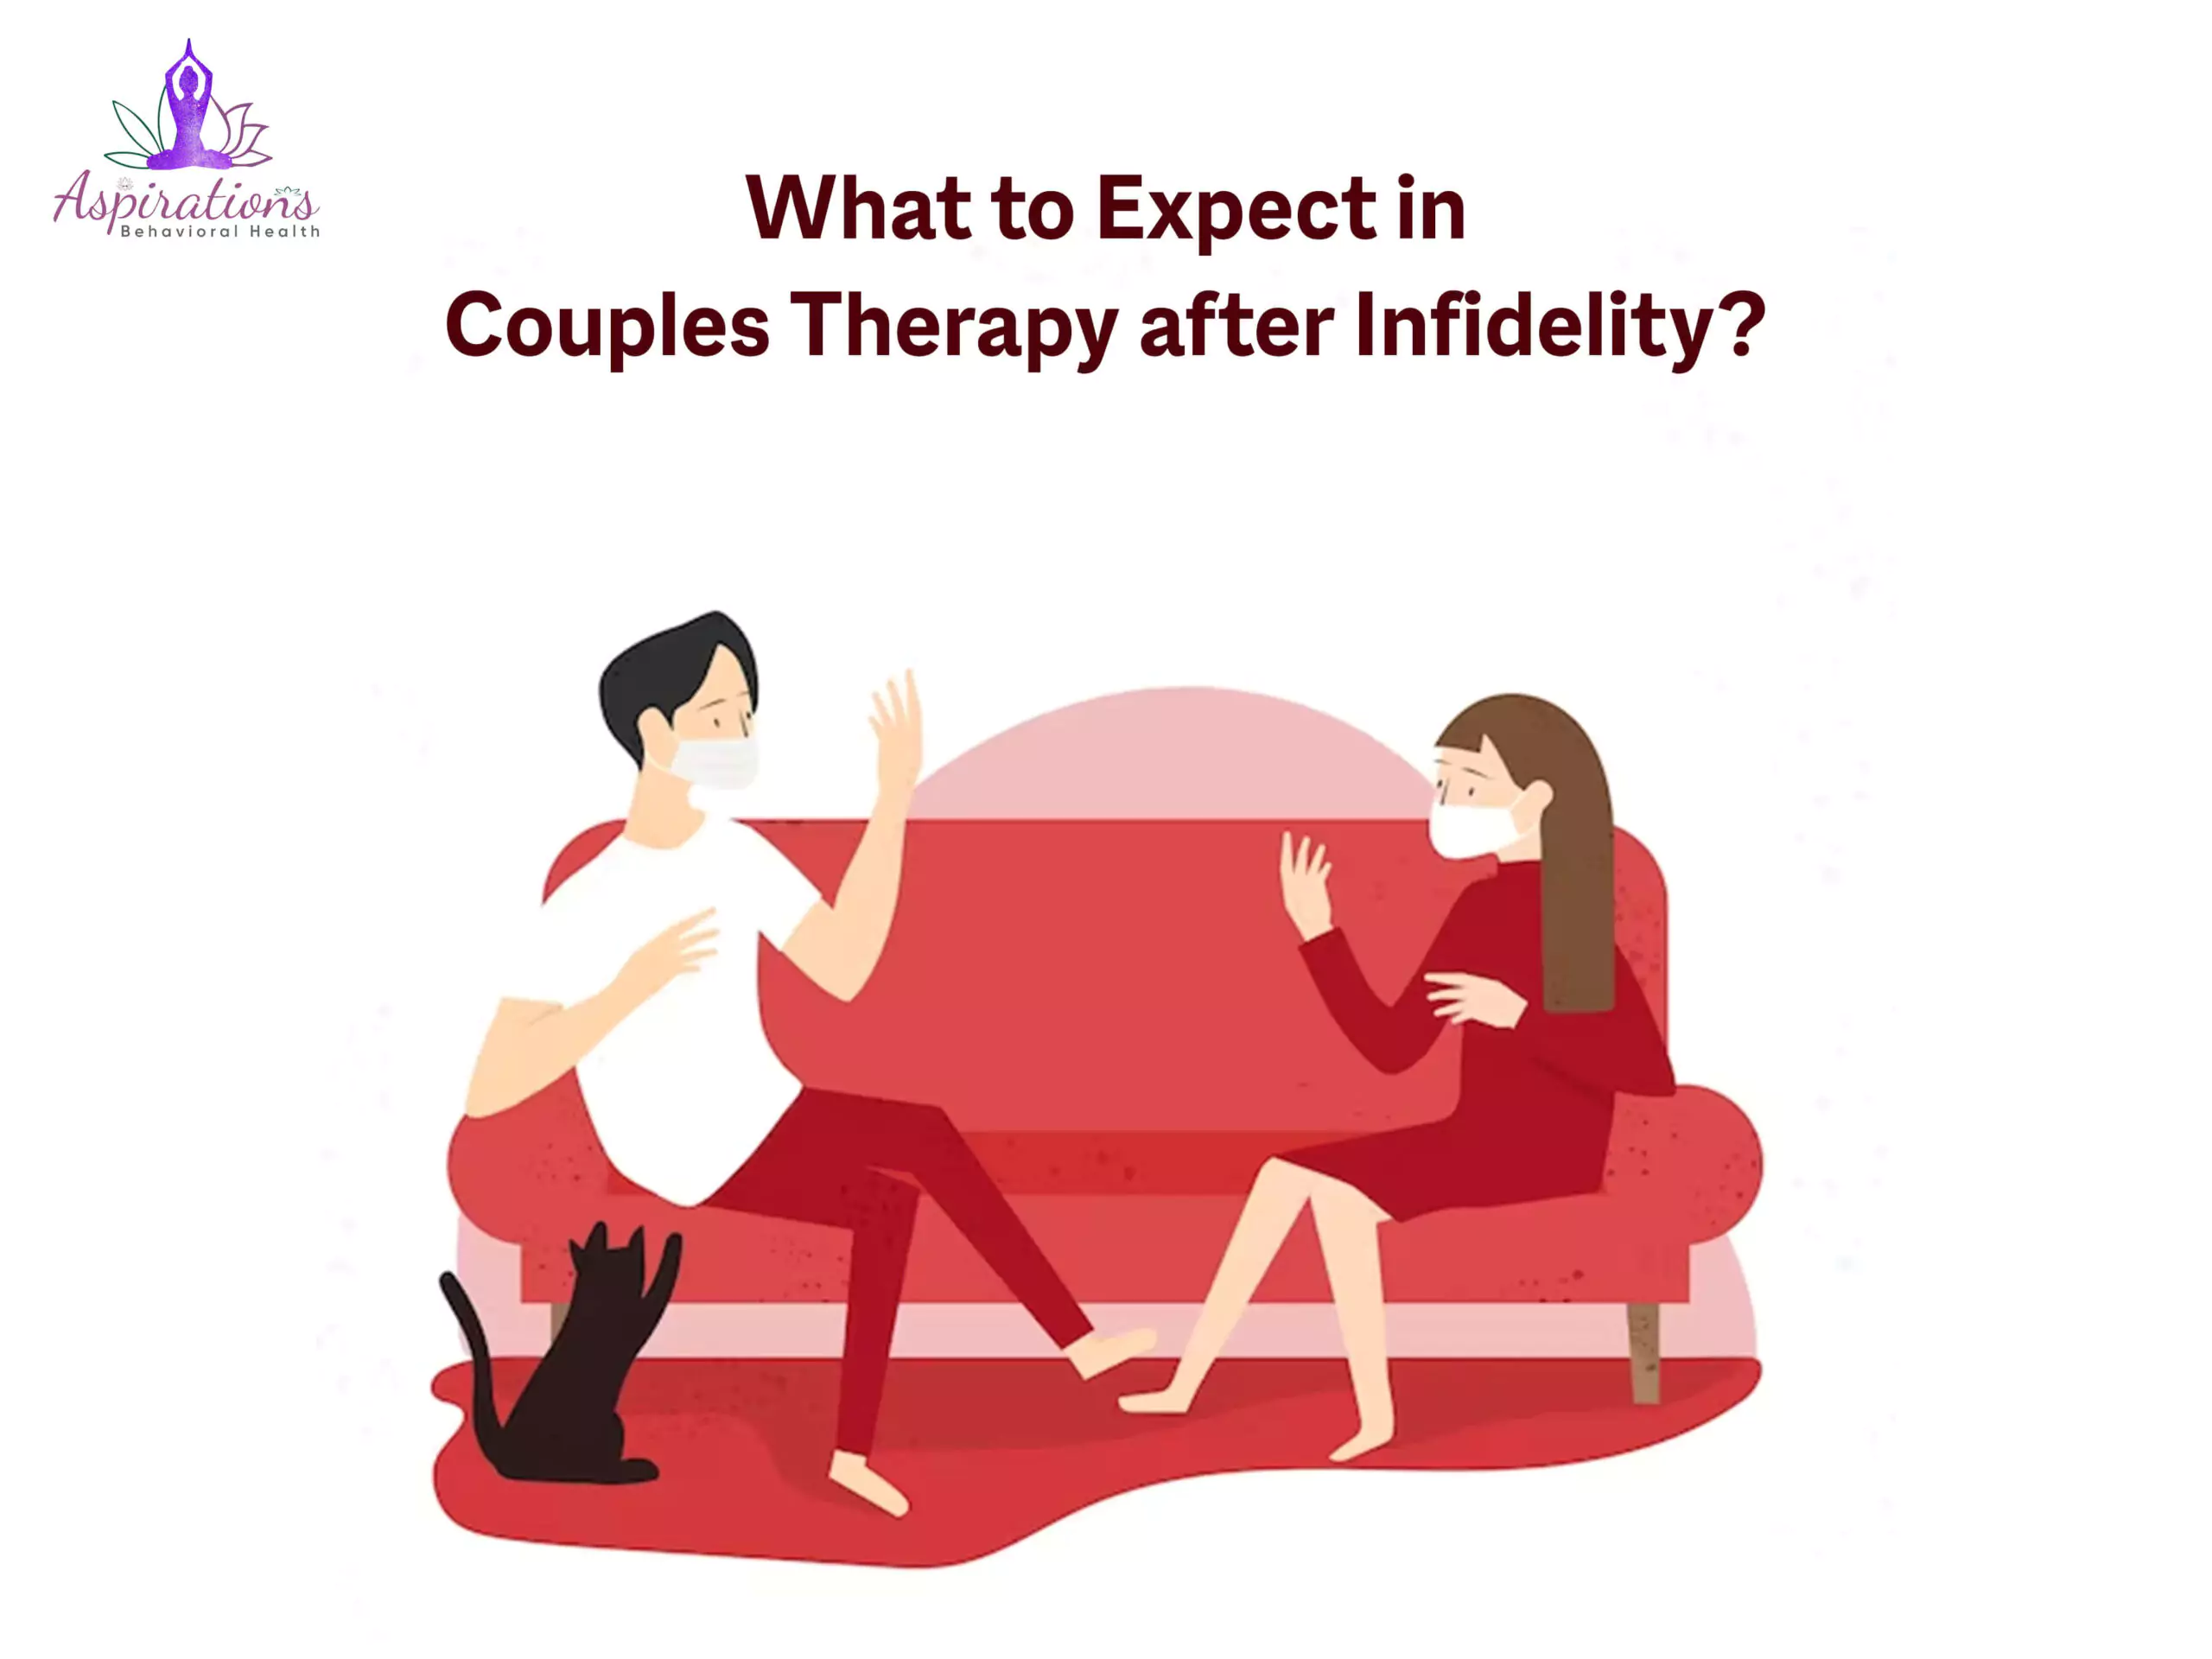 What to Expect in Couples Therapy after Infidelity